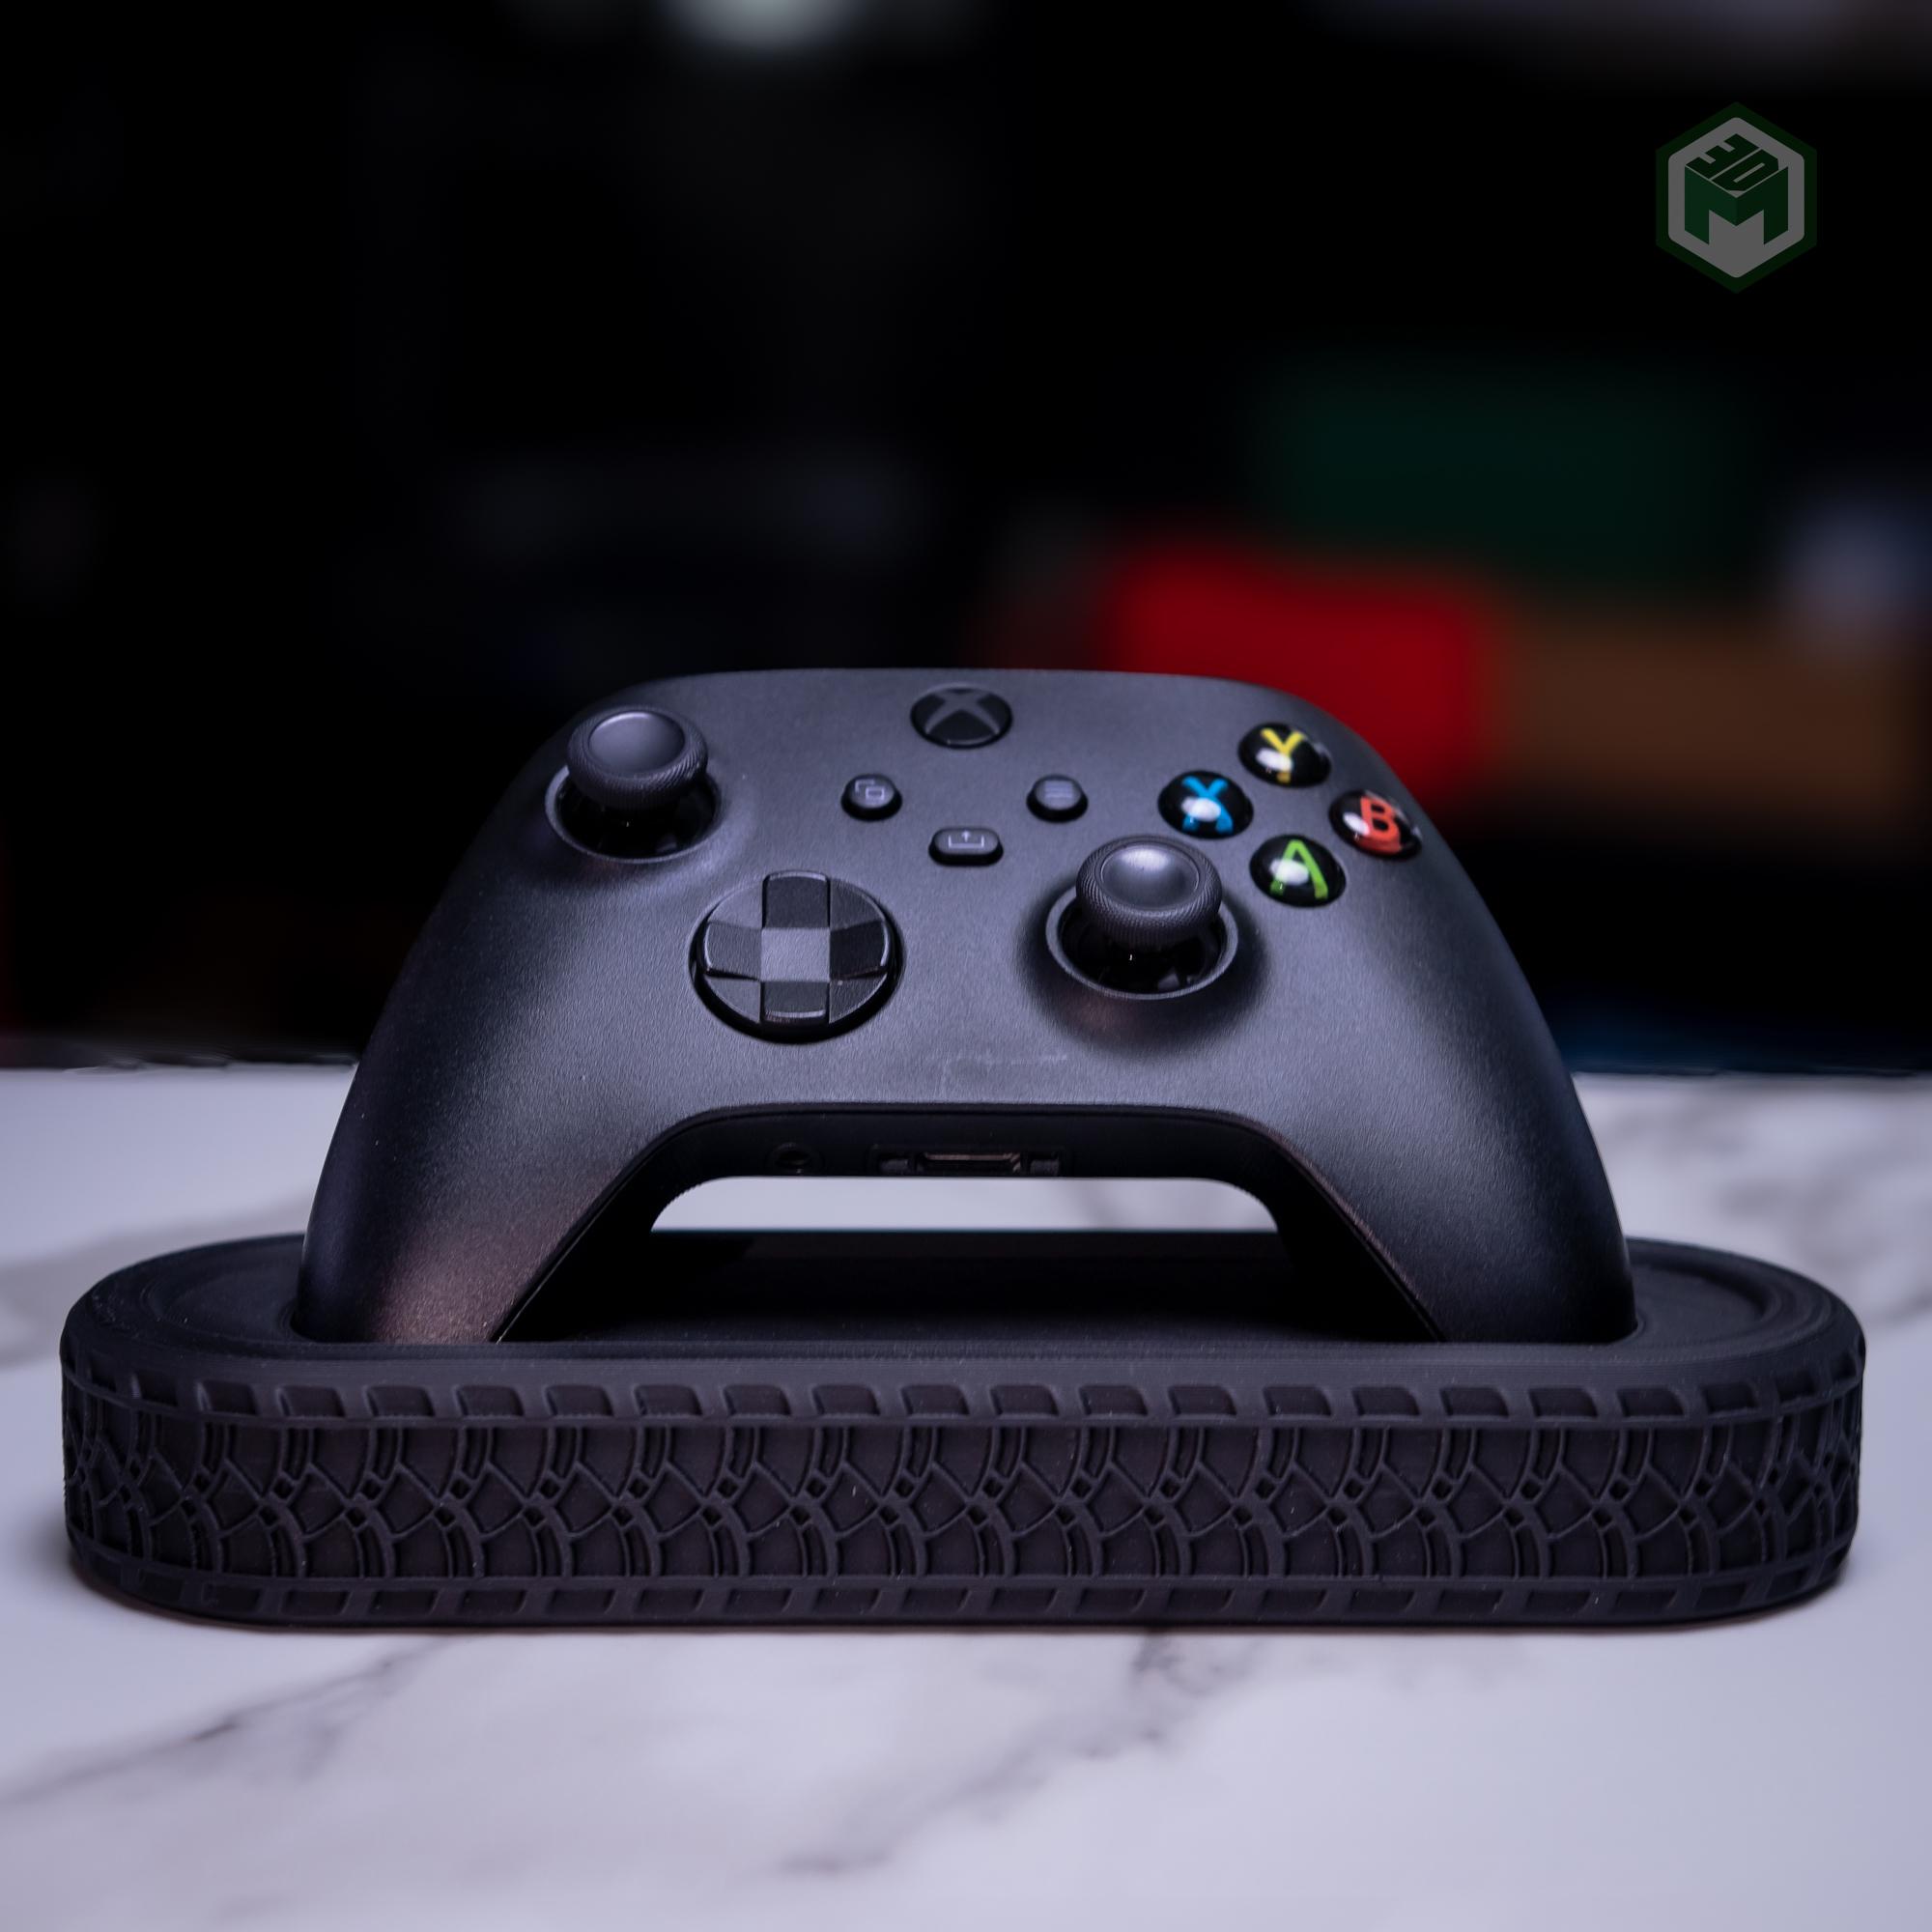 Tire Tread Game Controller Stand | Early Access & Commercial License 3d model